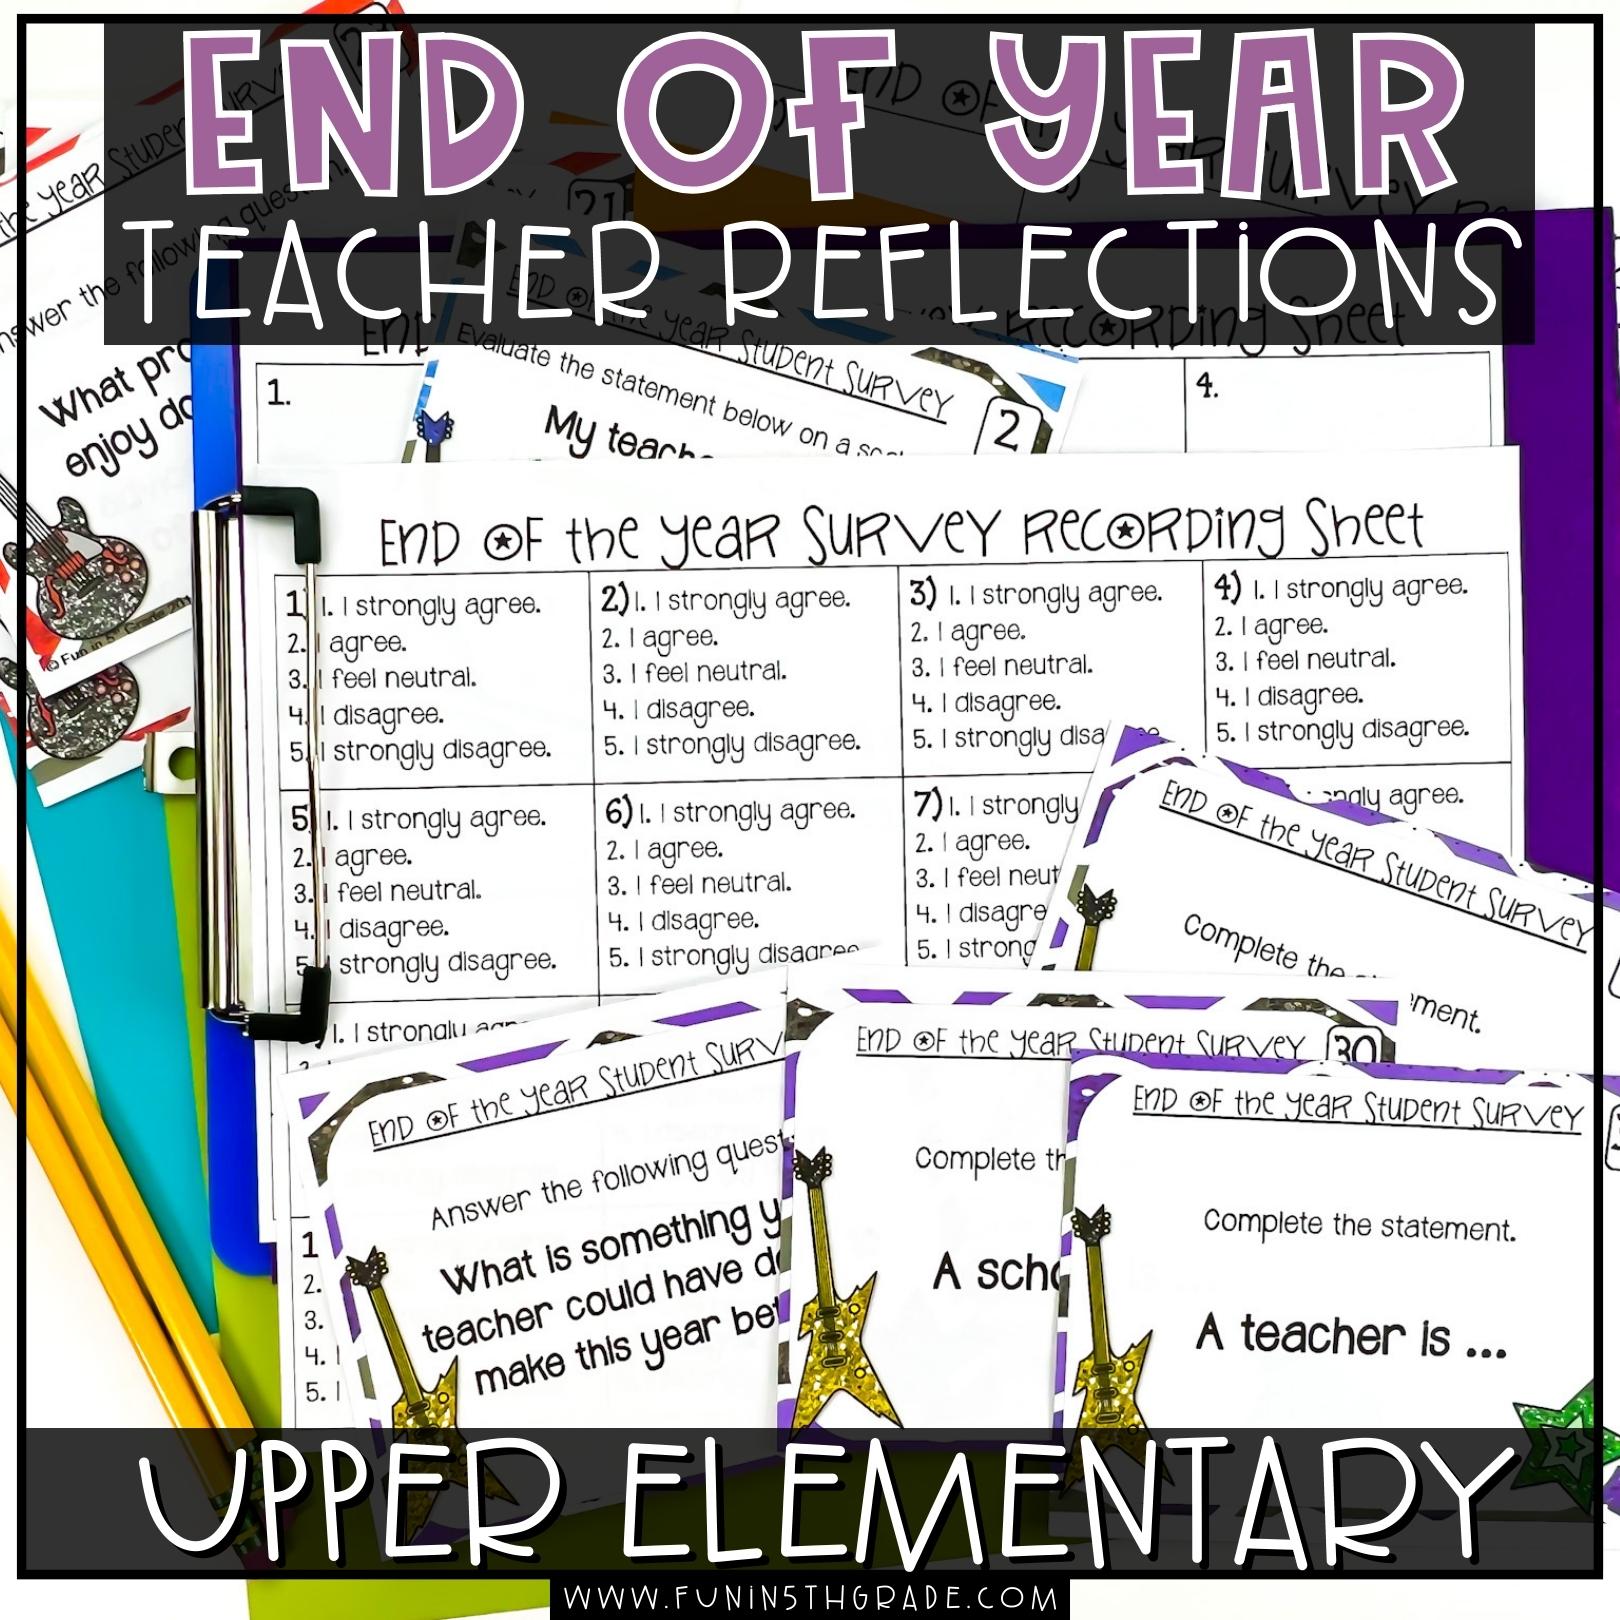 End-of-year teacher reflections blog image with Rockin' Student Survey task cards in the background image